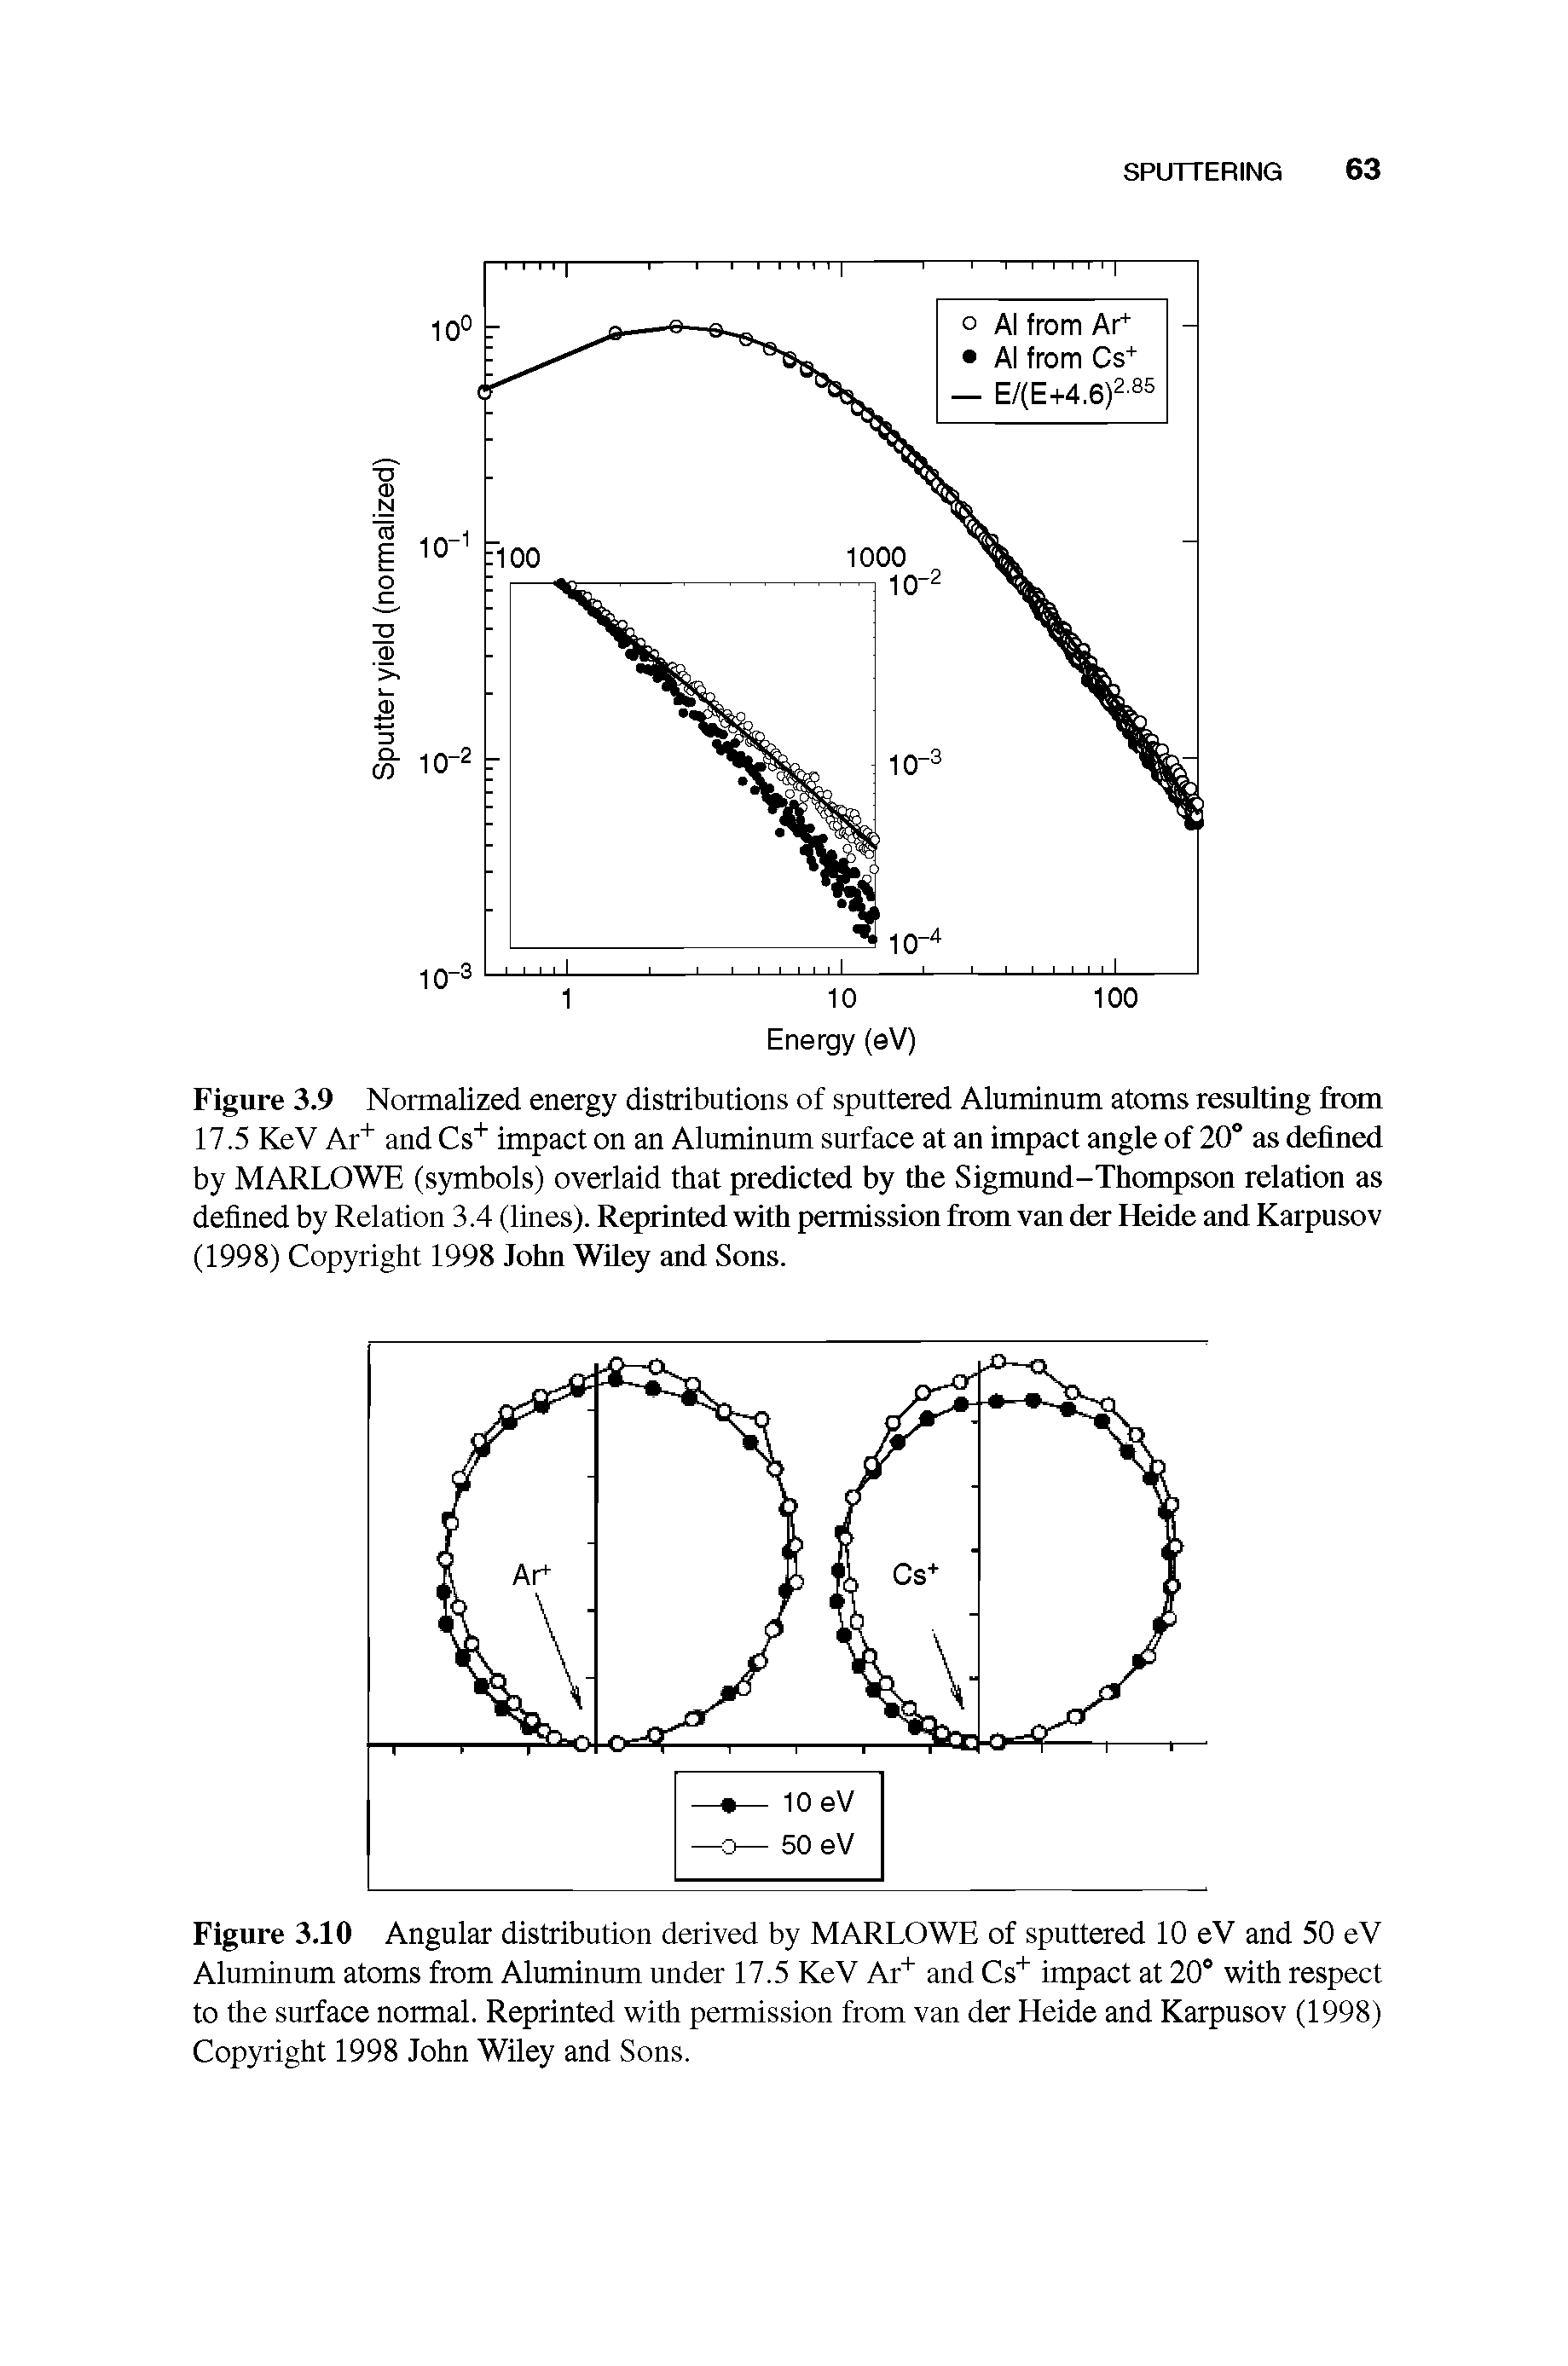 Figure 3.9 Normalized energy distributions of sputtered Aluminum atoms resulting from 17.5 KeV Ar and Cs impact on an Aluminum surface at an impact angle of 20 as defined by MARLOWE (symbols) overlaid that predicted by the Sigmund-Thompson relation as defined by Relation 3.4 (lines). Reprinted with permission from van der Heide and Karpusov (1998) Copyright 1998 John WUey and Sons.